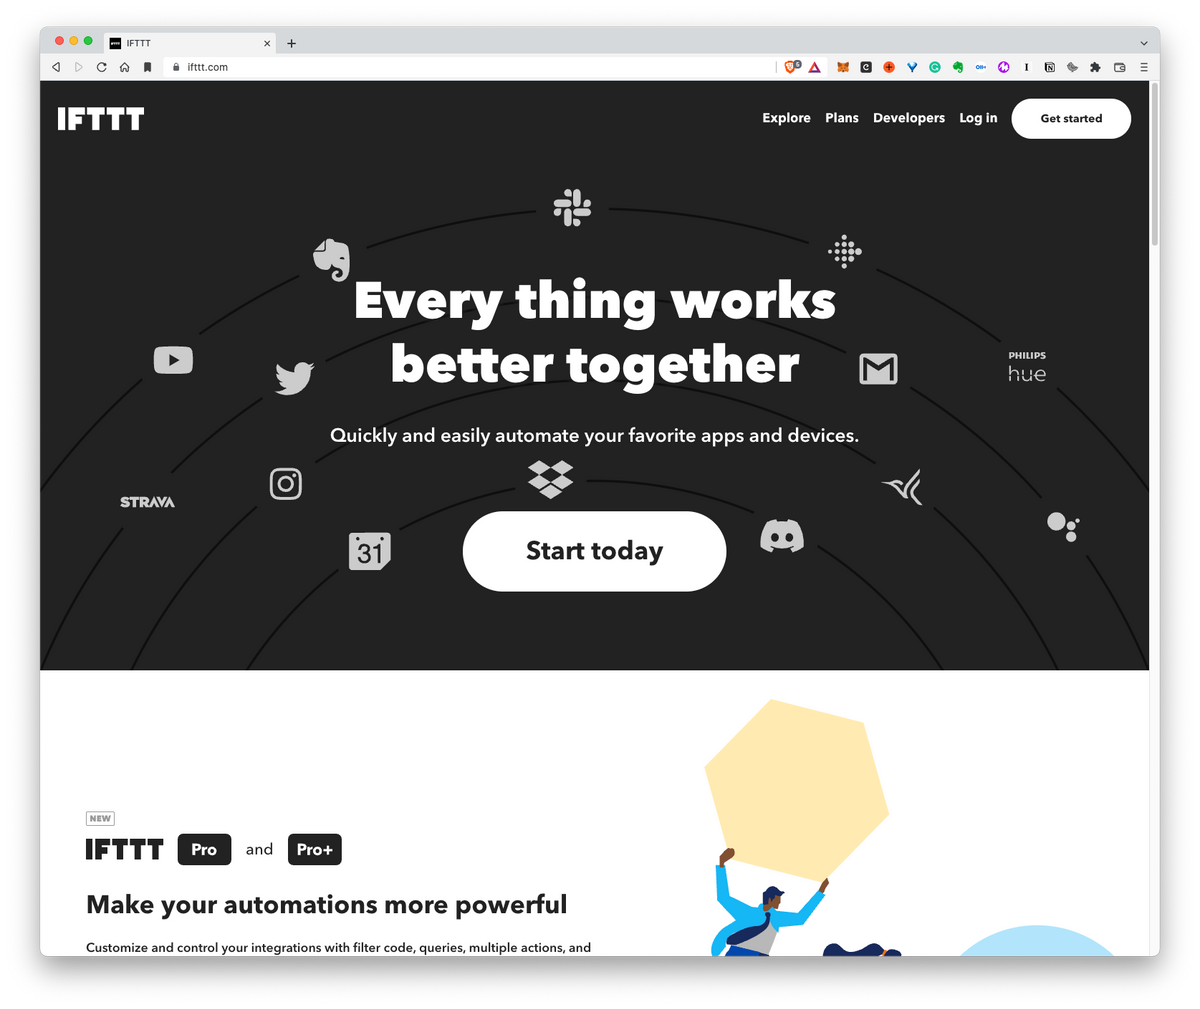 IFTTT: Everything works better together. Quickly and easily automate your favorite apps and devices.